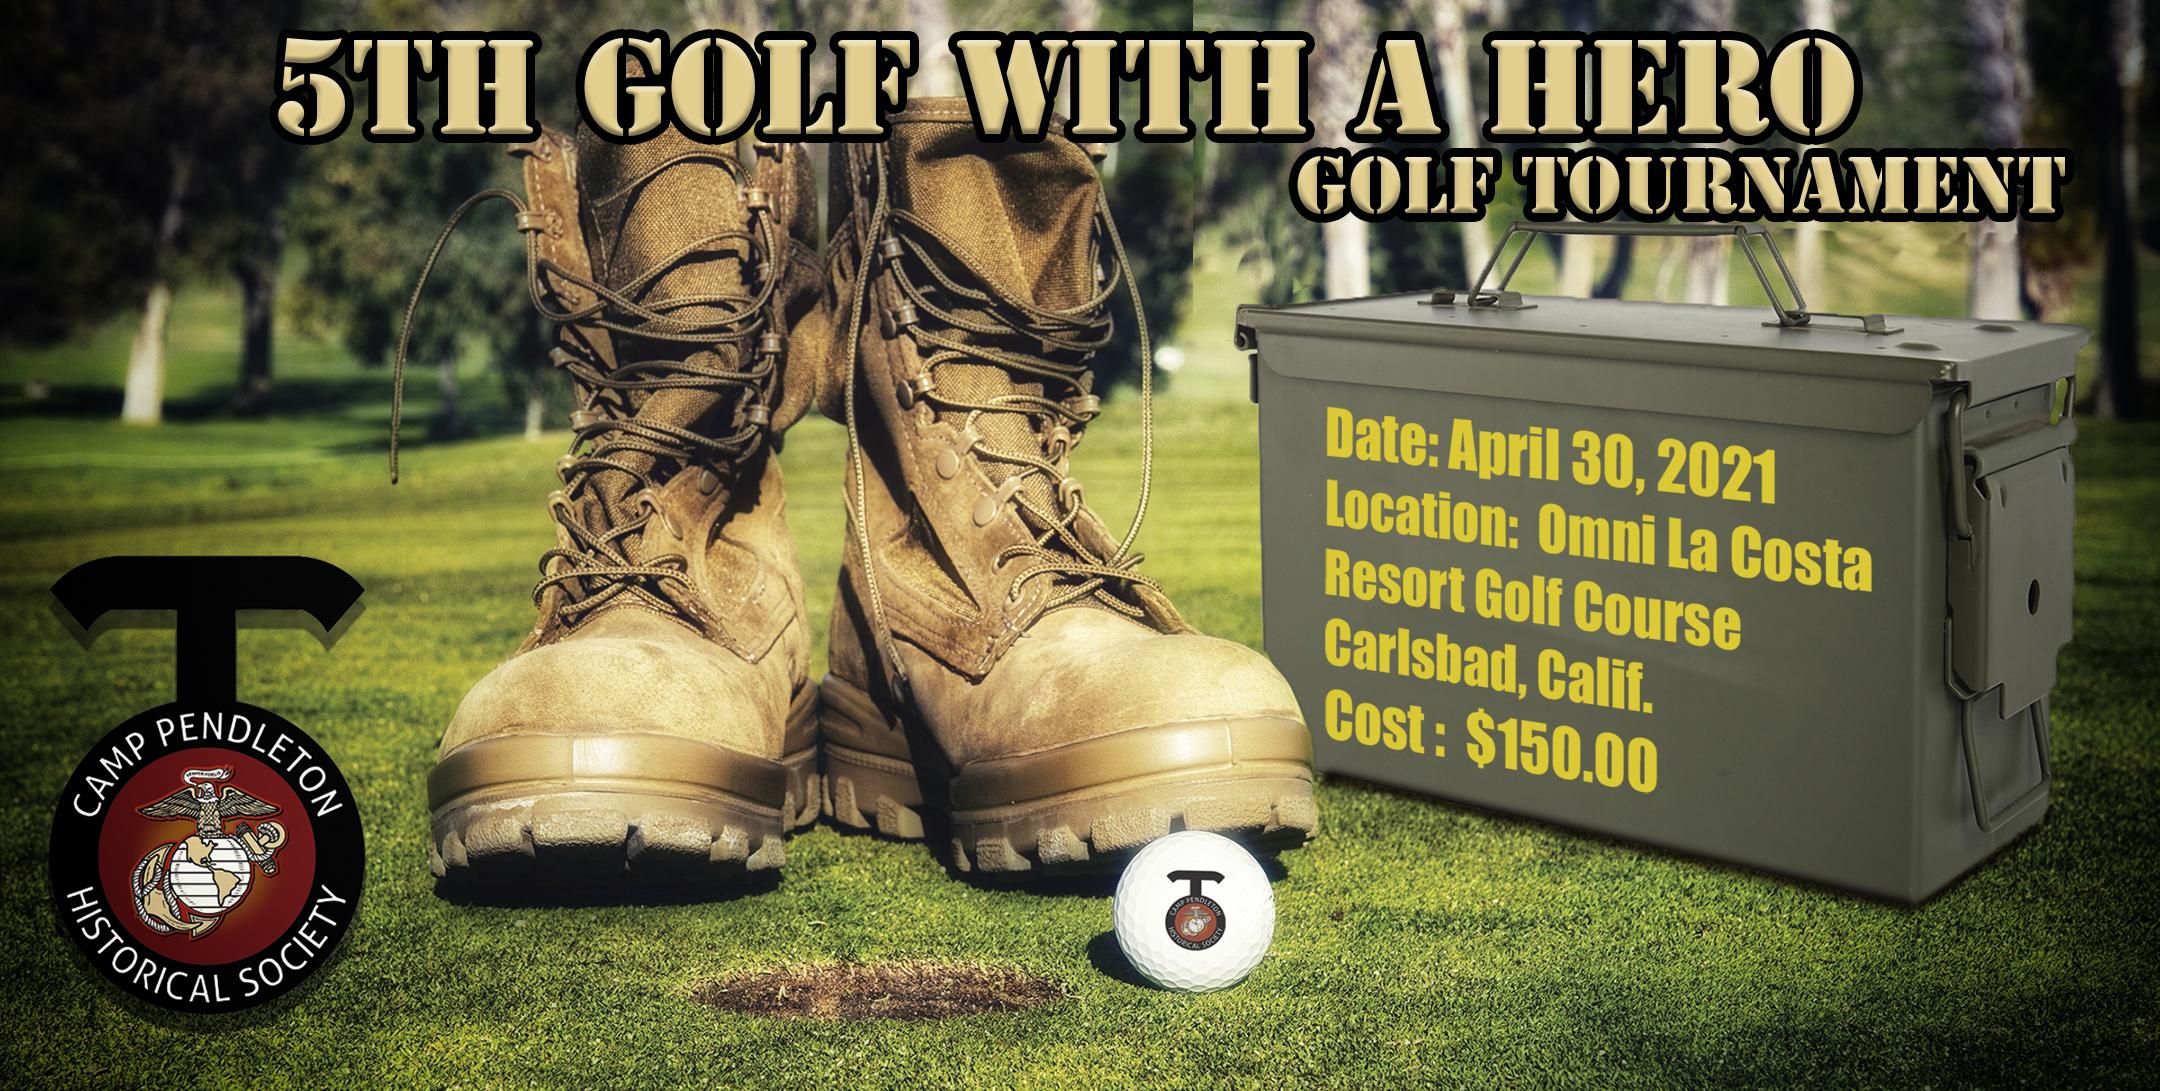 5th “Golf with a Hero” Golf Tournament